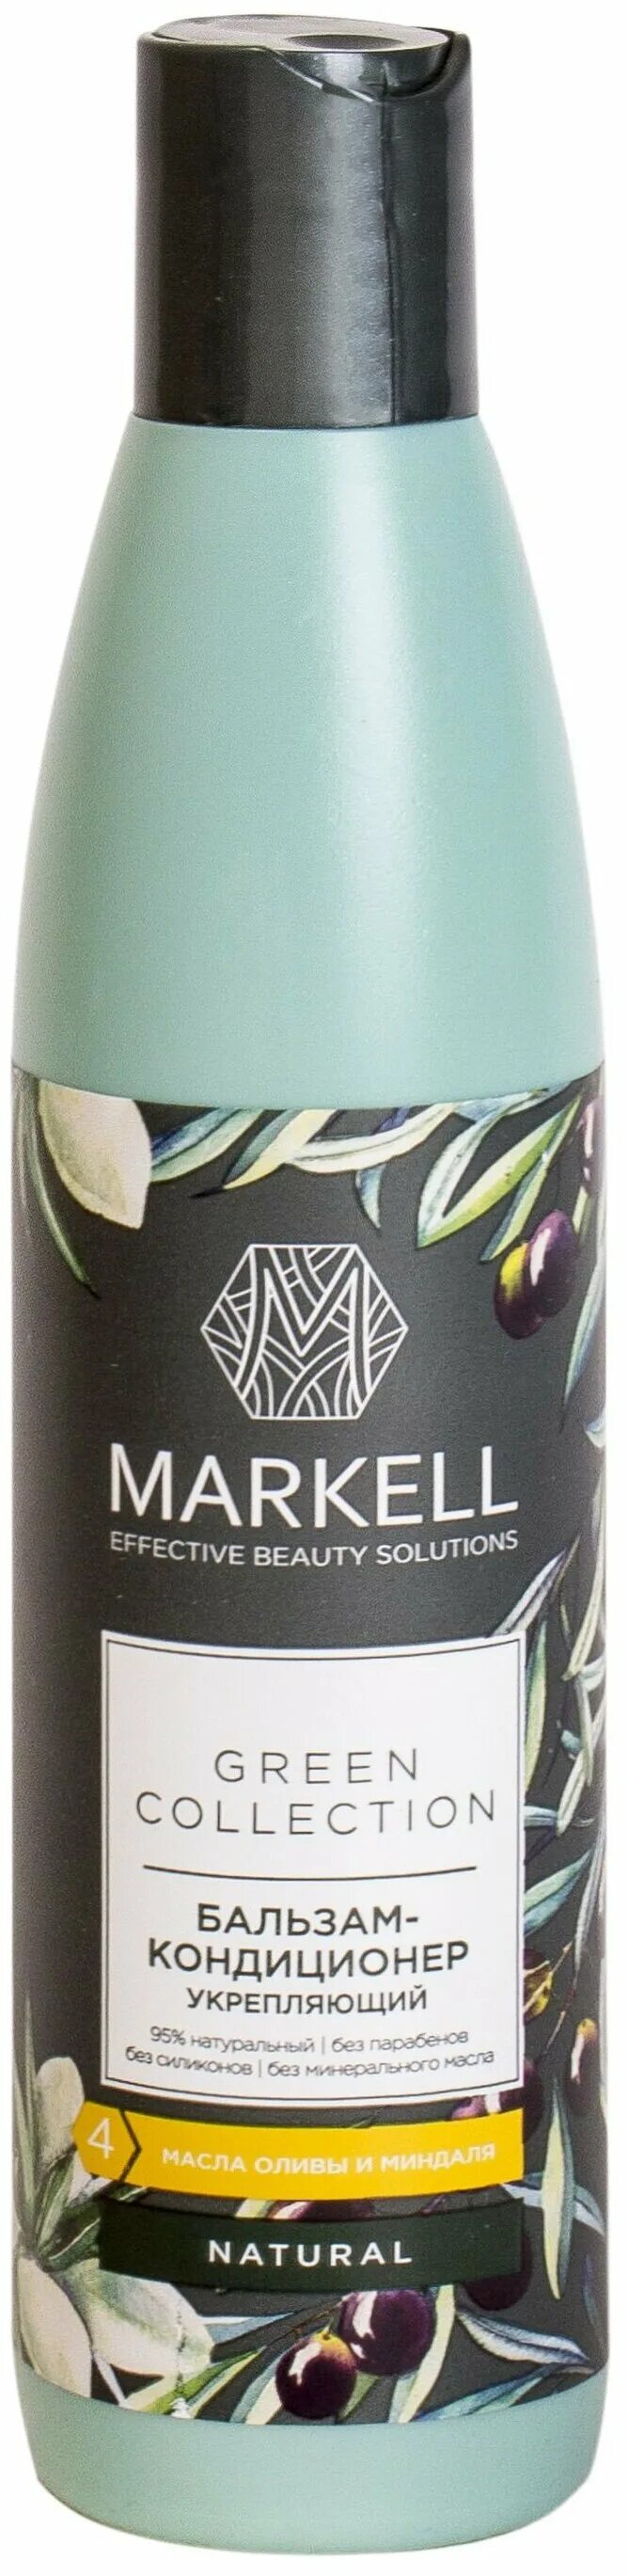 Markell шампунь  Green collection. (Markell Green collection) шампунь восстанавливающий, 250мл. Markell Green collection шампунь восстанавливающий, 500 мл. (Markell Green collection) шампунь укрепляющий, 500мл. Шампунь collection